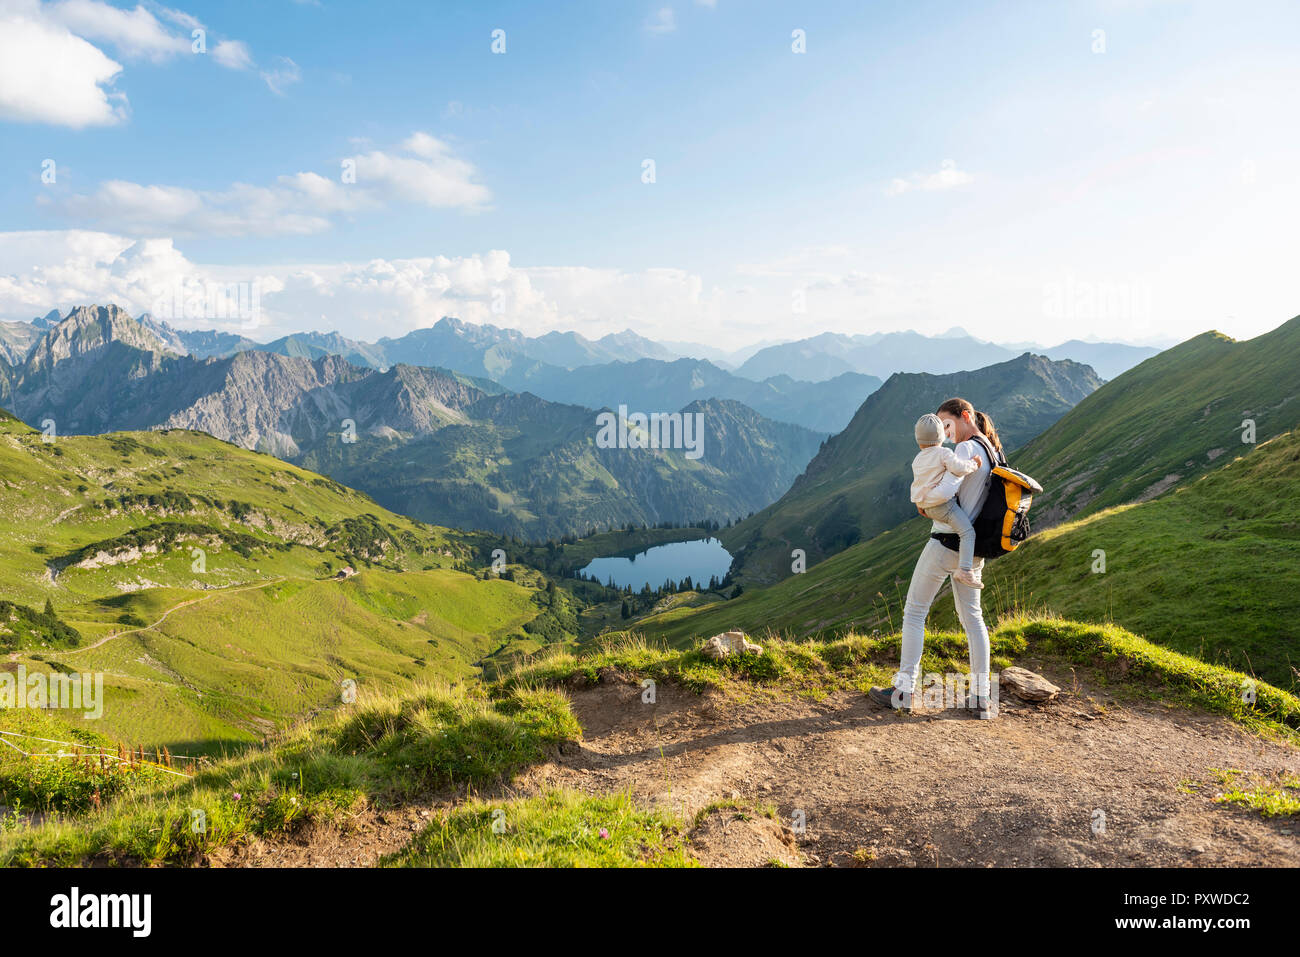 Germany, Bavaria, Oberstdorf, mother and little daughter on a hike in the mountains Stock Photo